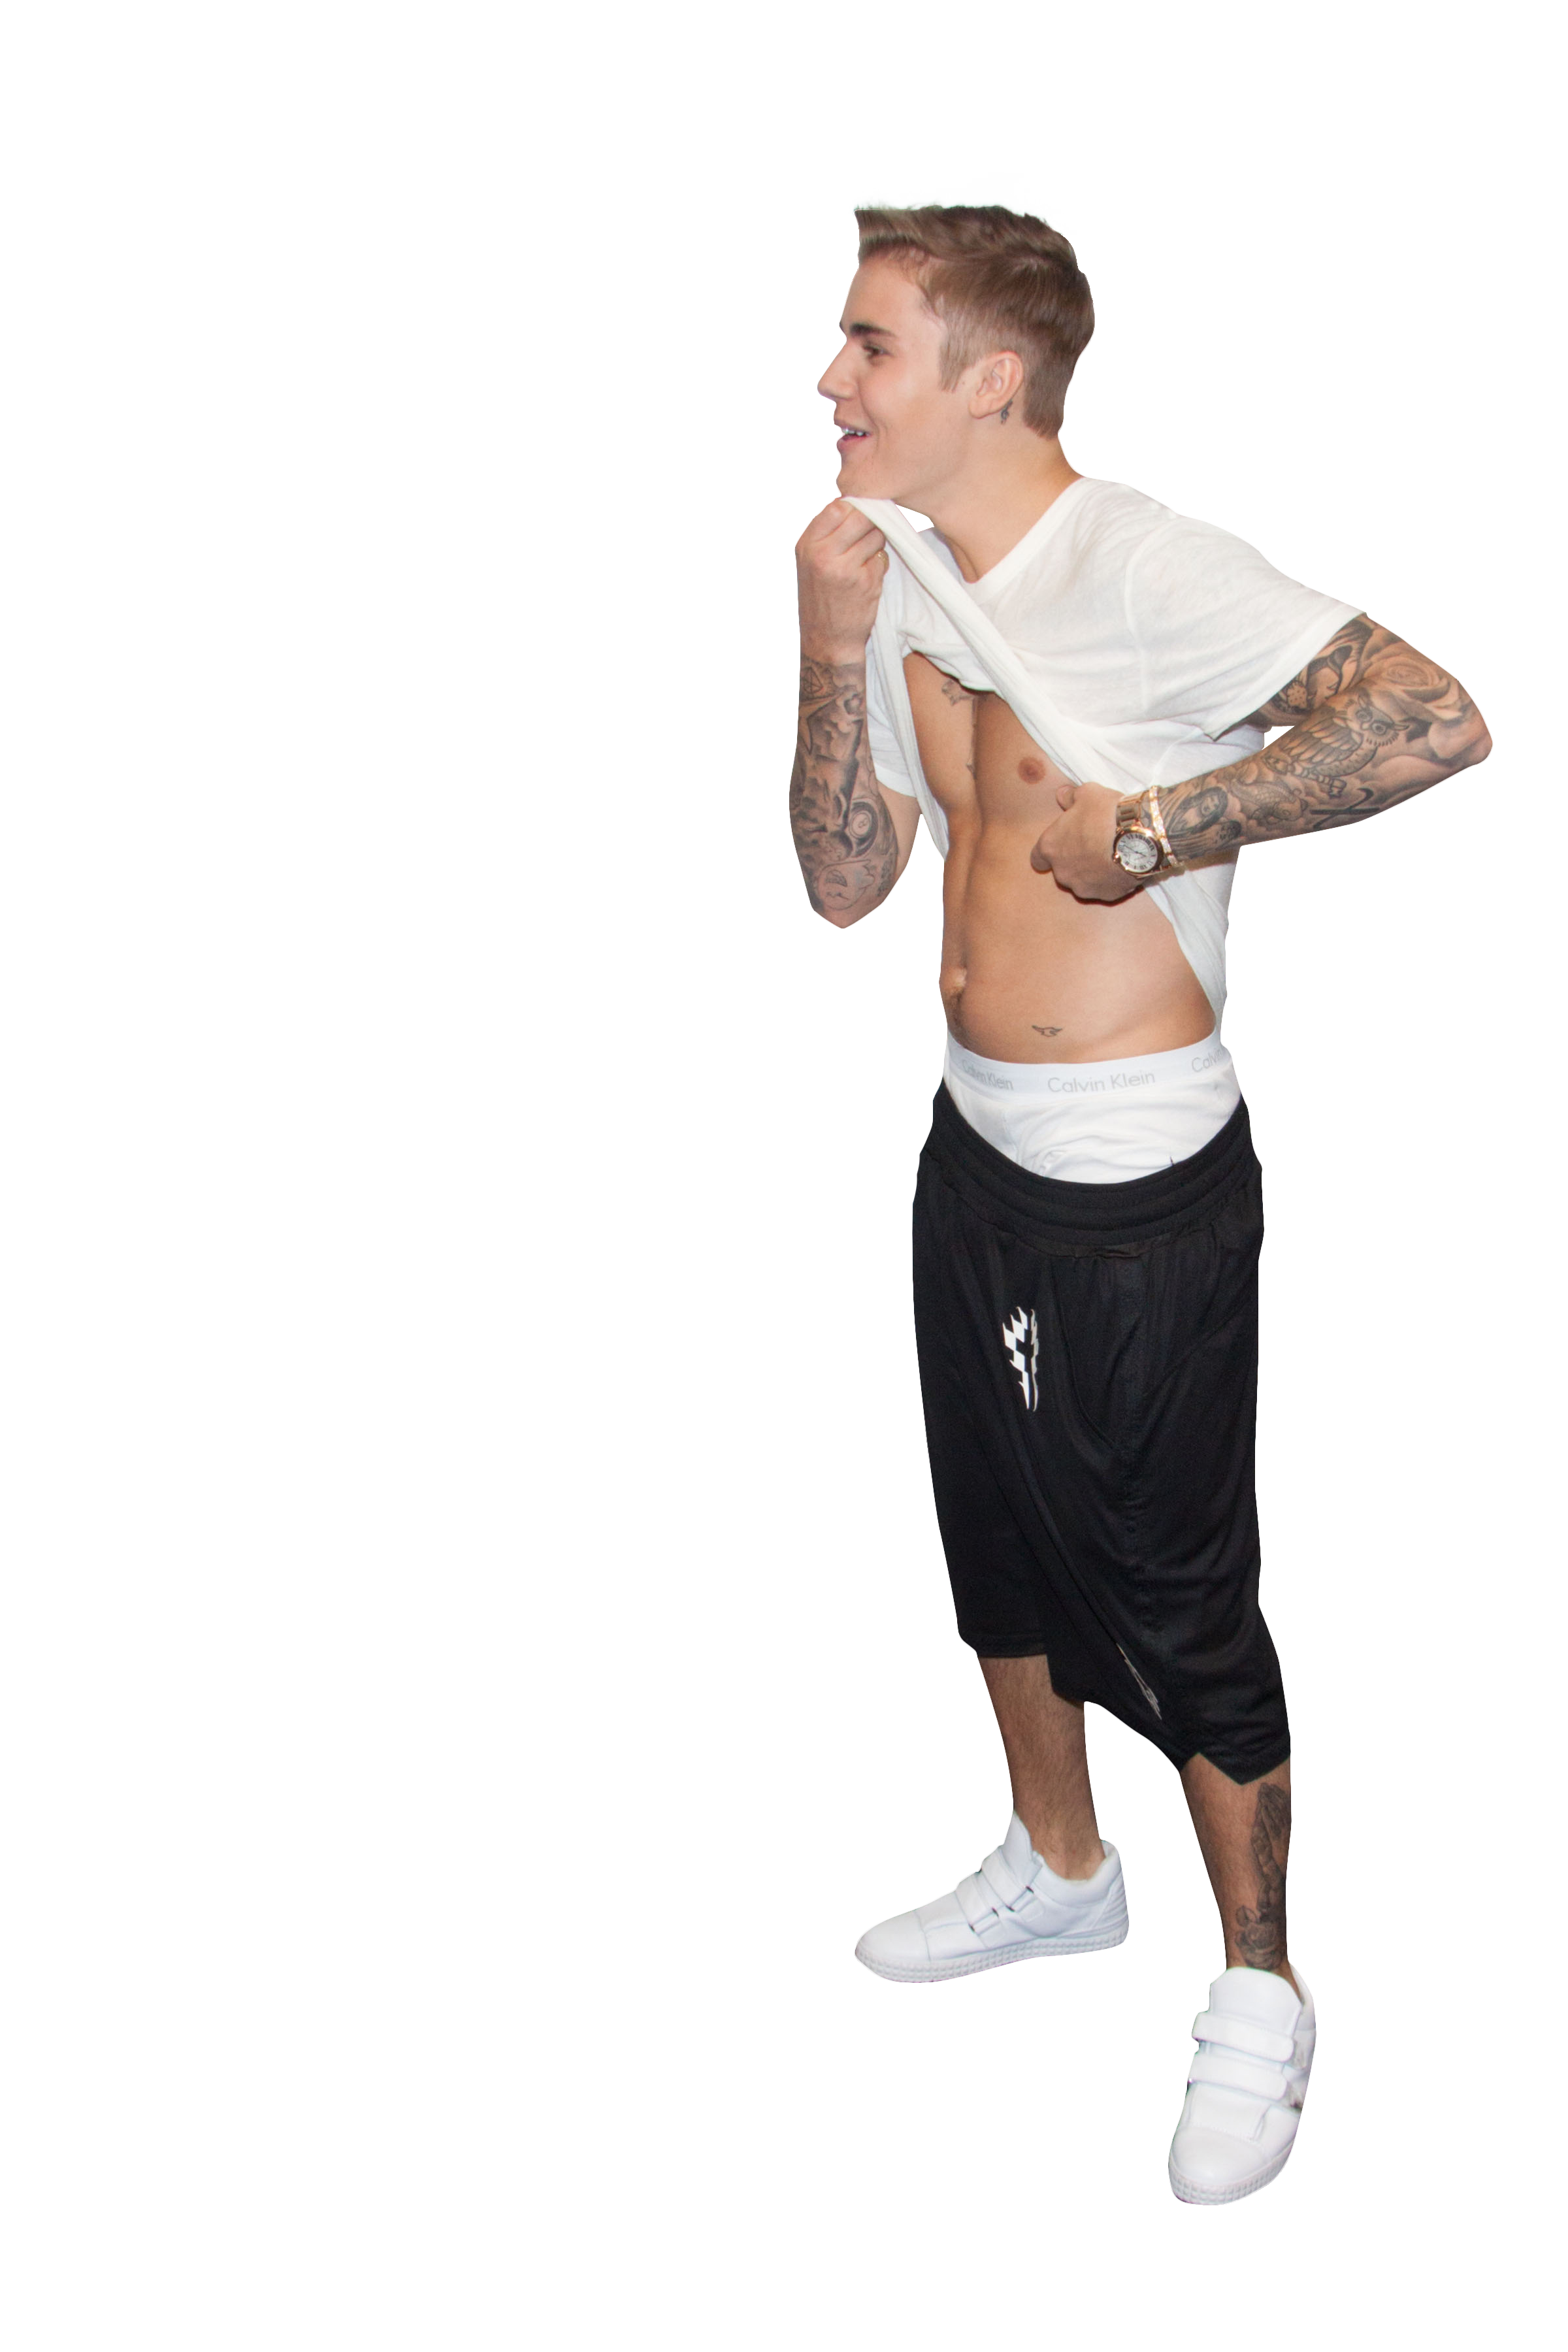 Justin Bieber Showing Sixpack PNG Image